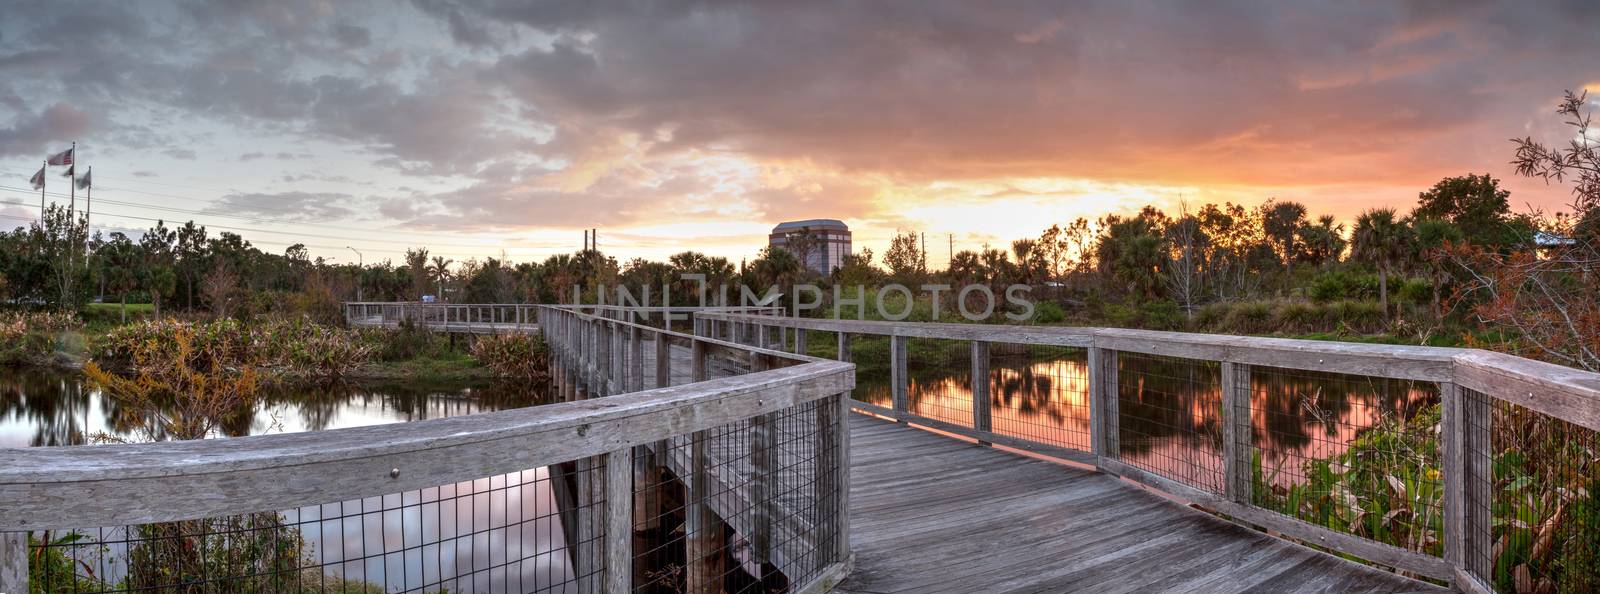 Bridge boardwalk made of wood along a marsh pond in Freedom Park in Naples, Florida